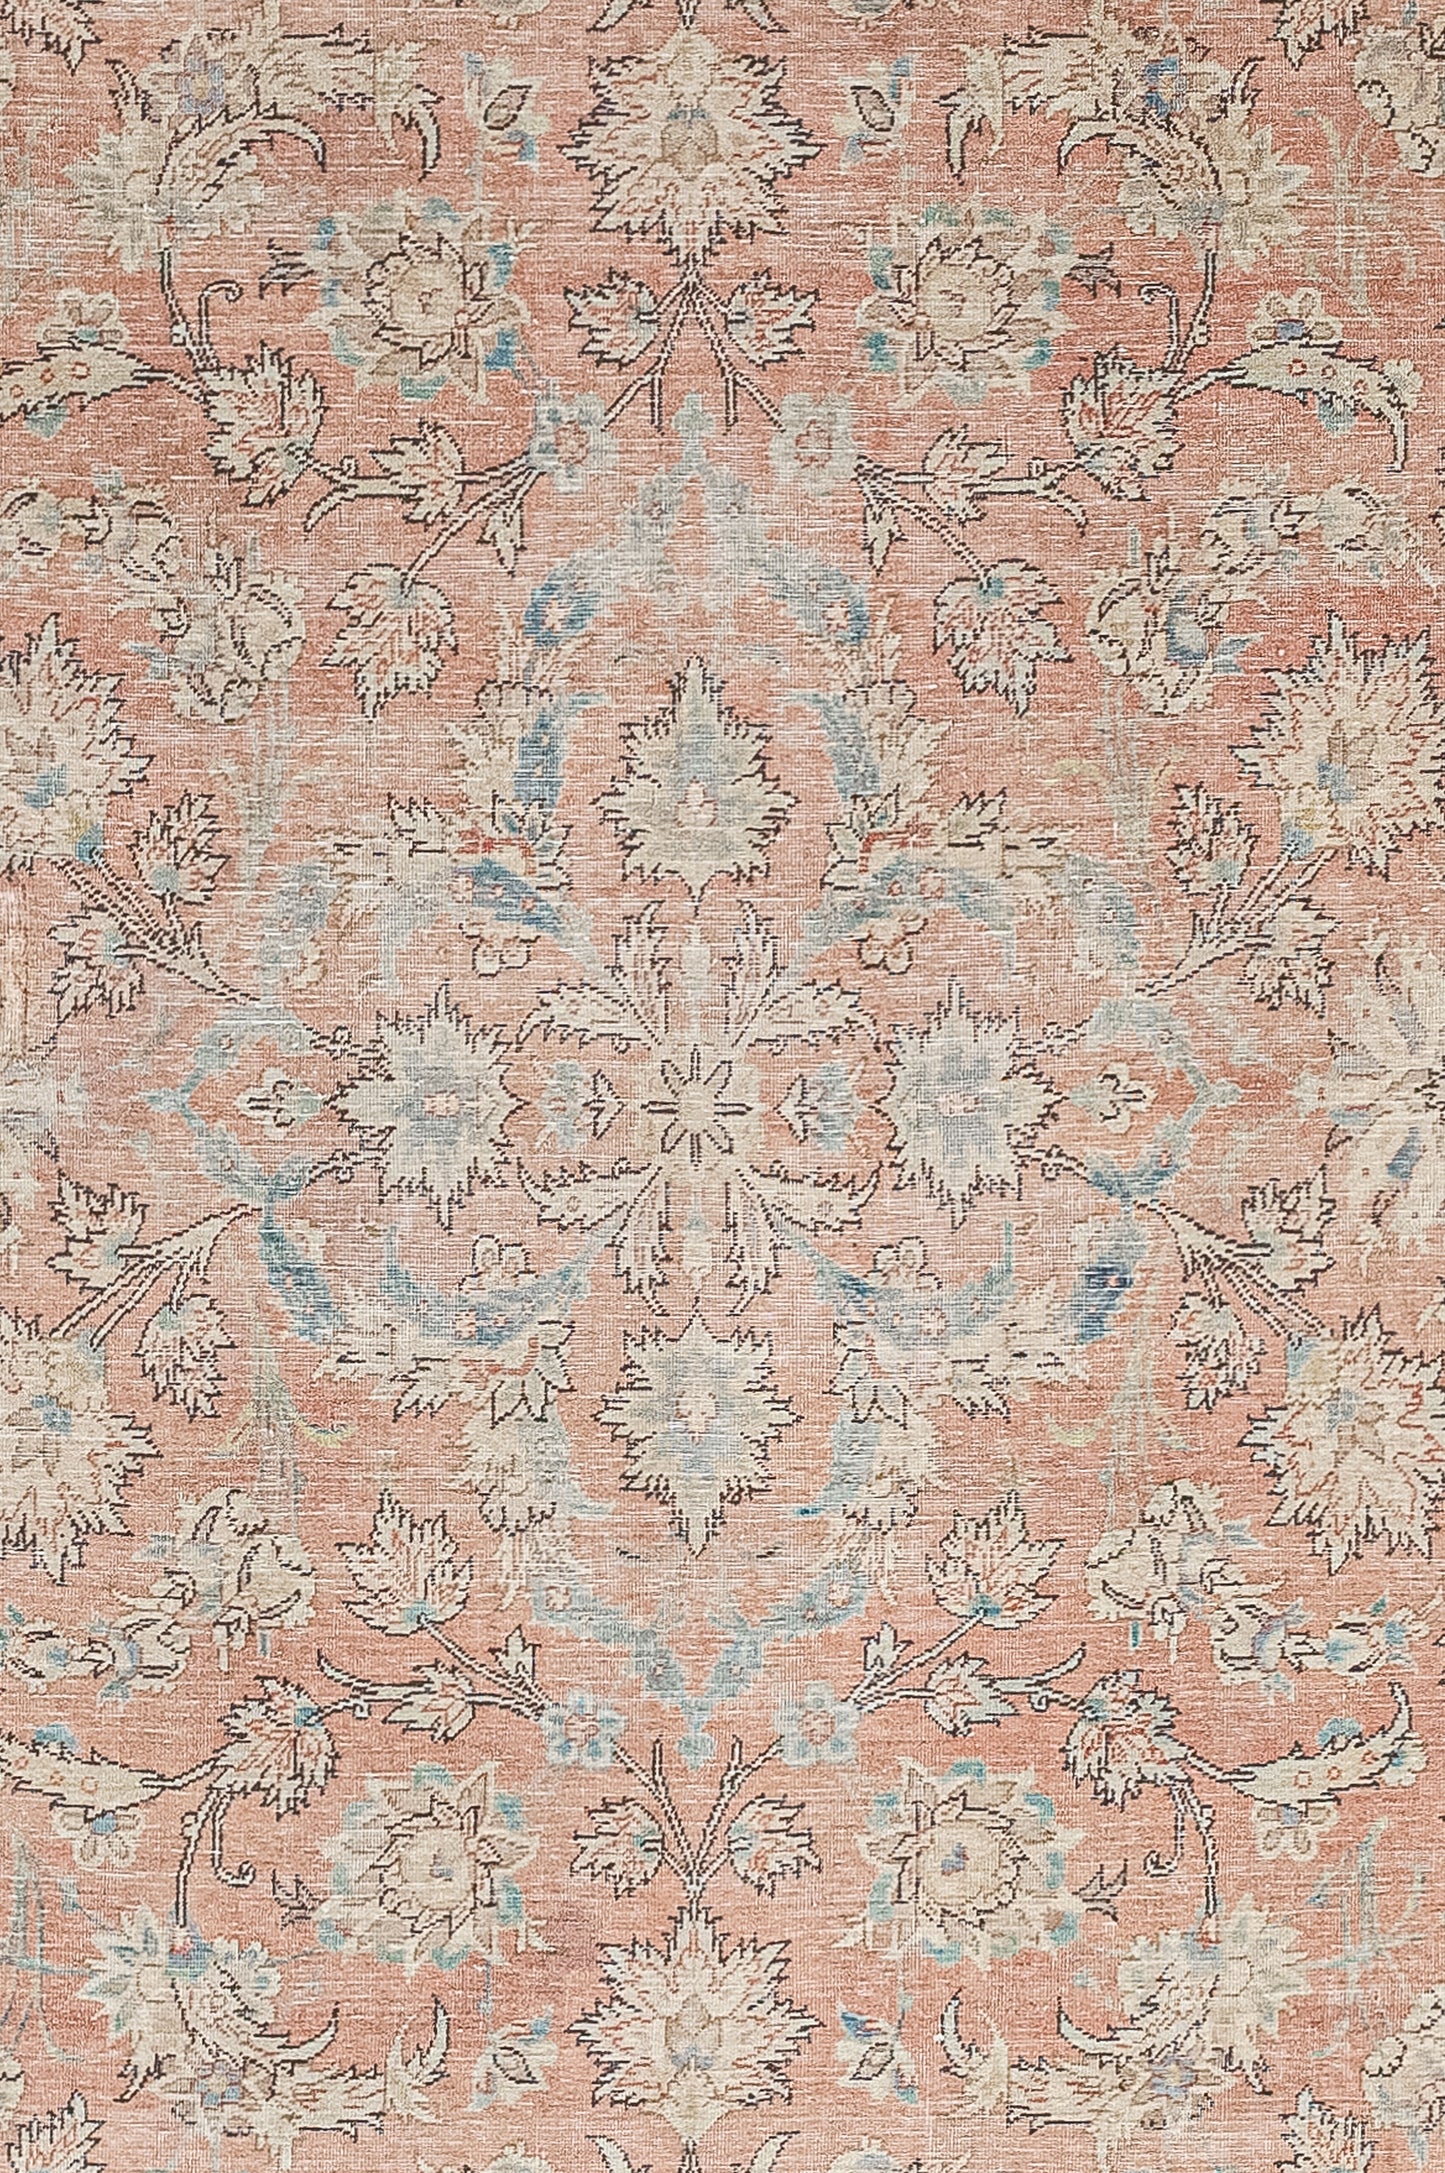 The foreground of the rug features a striking floral composition made up of symmetrically arranged perennial carnations.